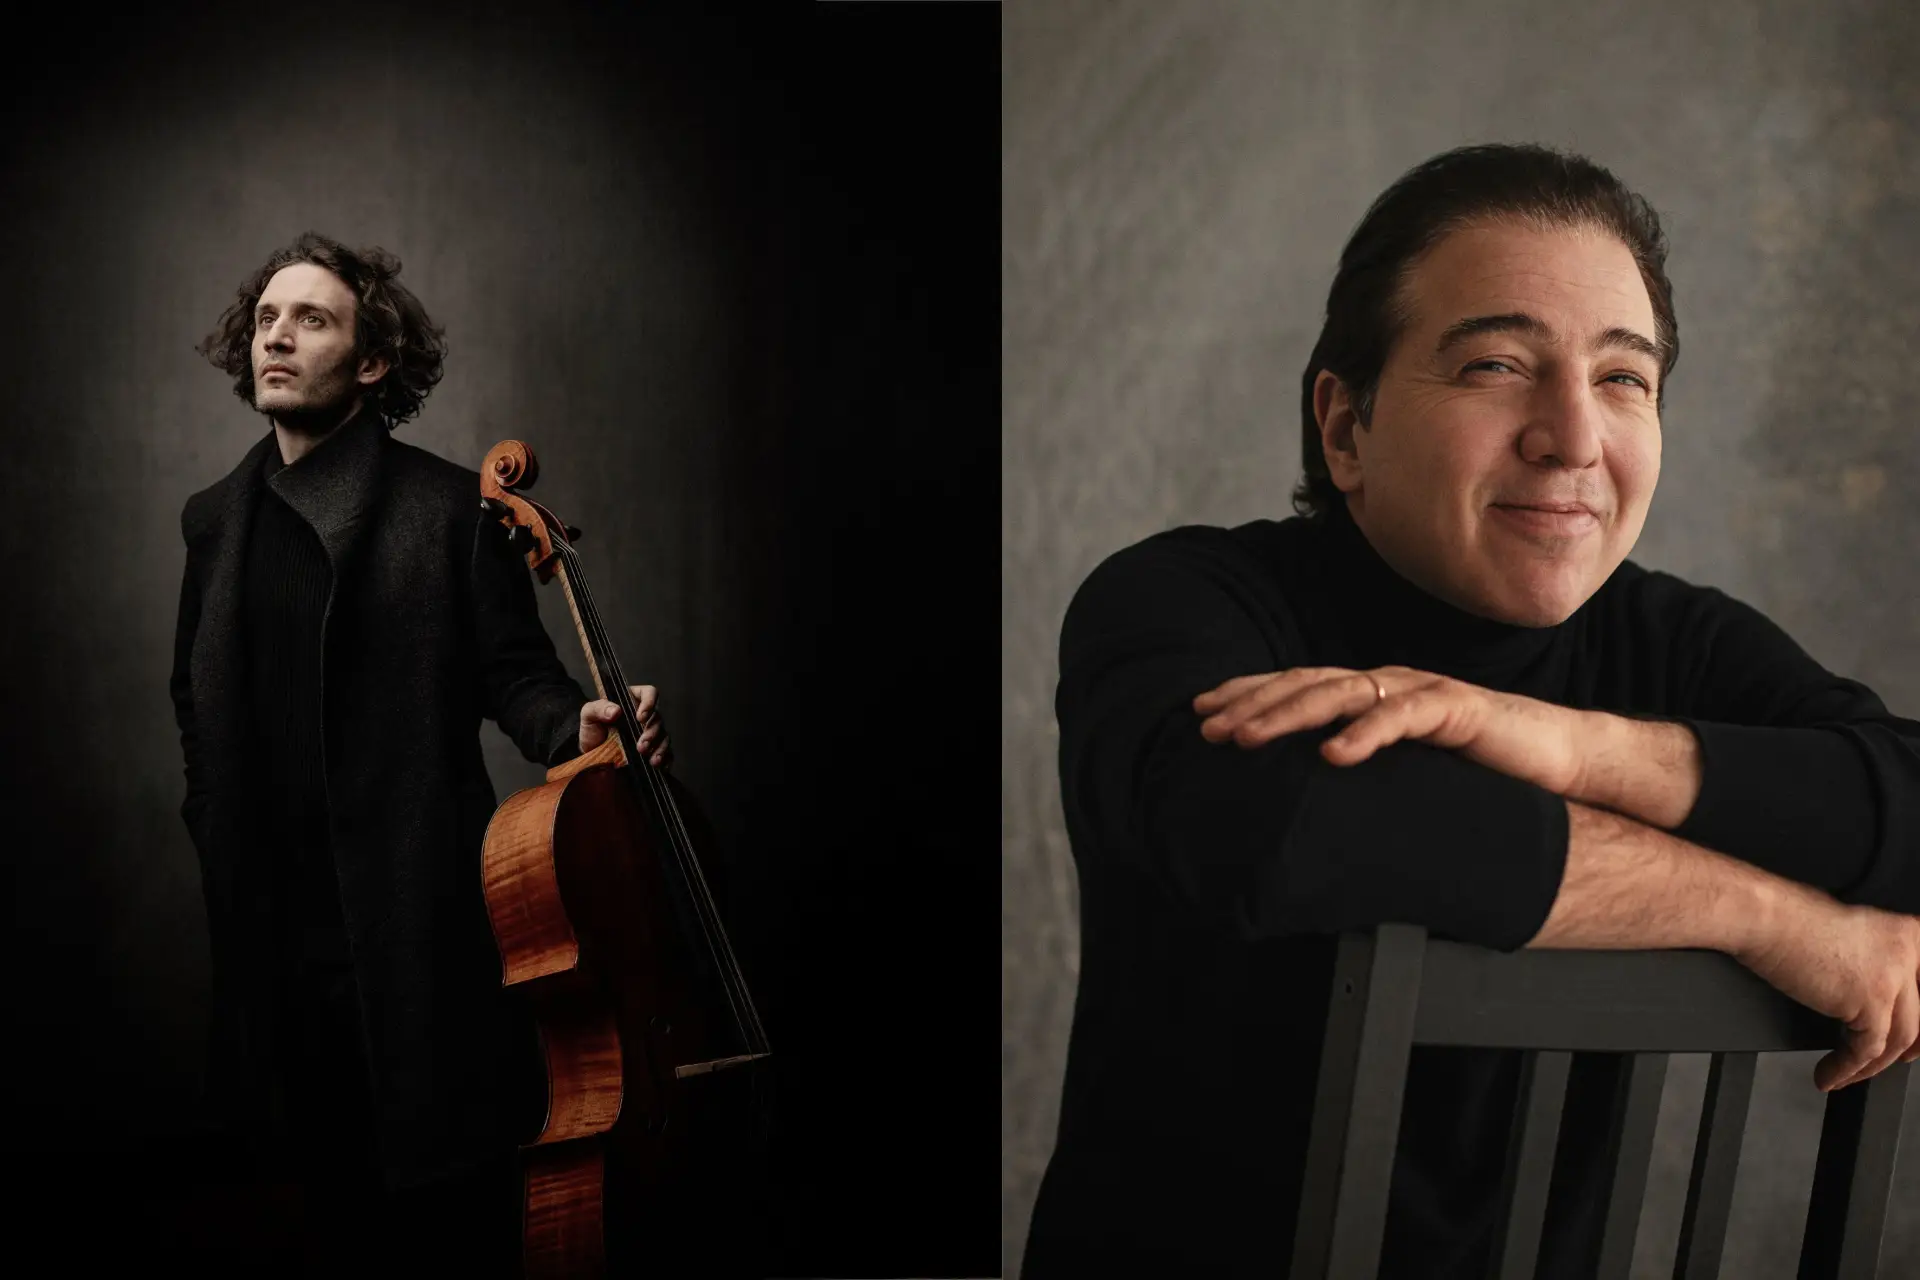 Two men pose in side-by-side images. On the left, a man stands with a cello; on the right, a man smiles at the camera while perched on a chair.